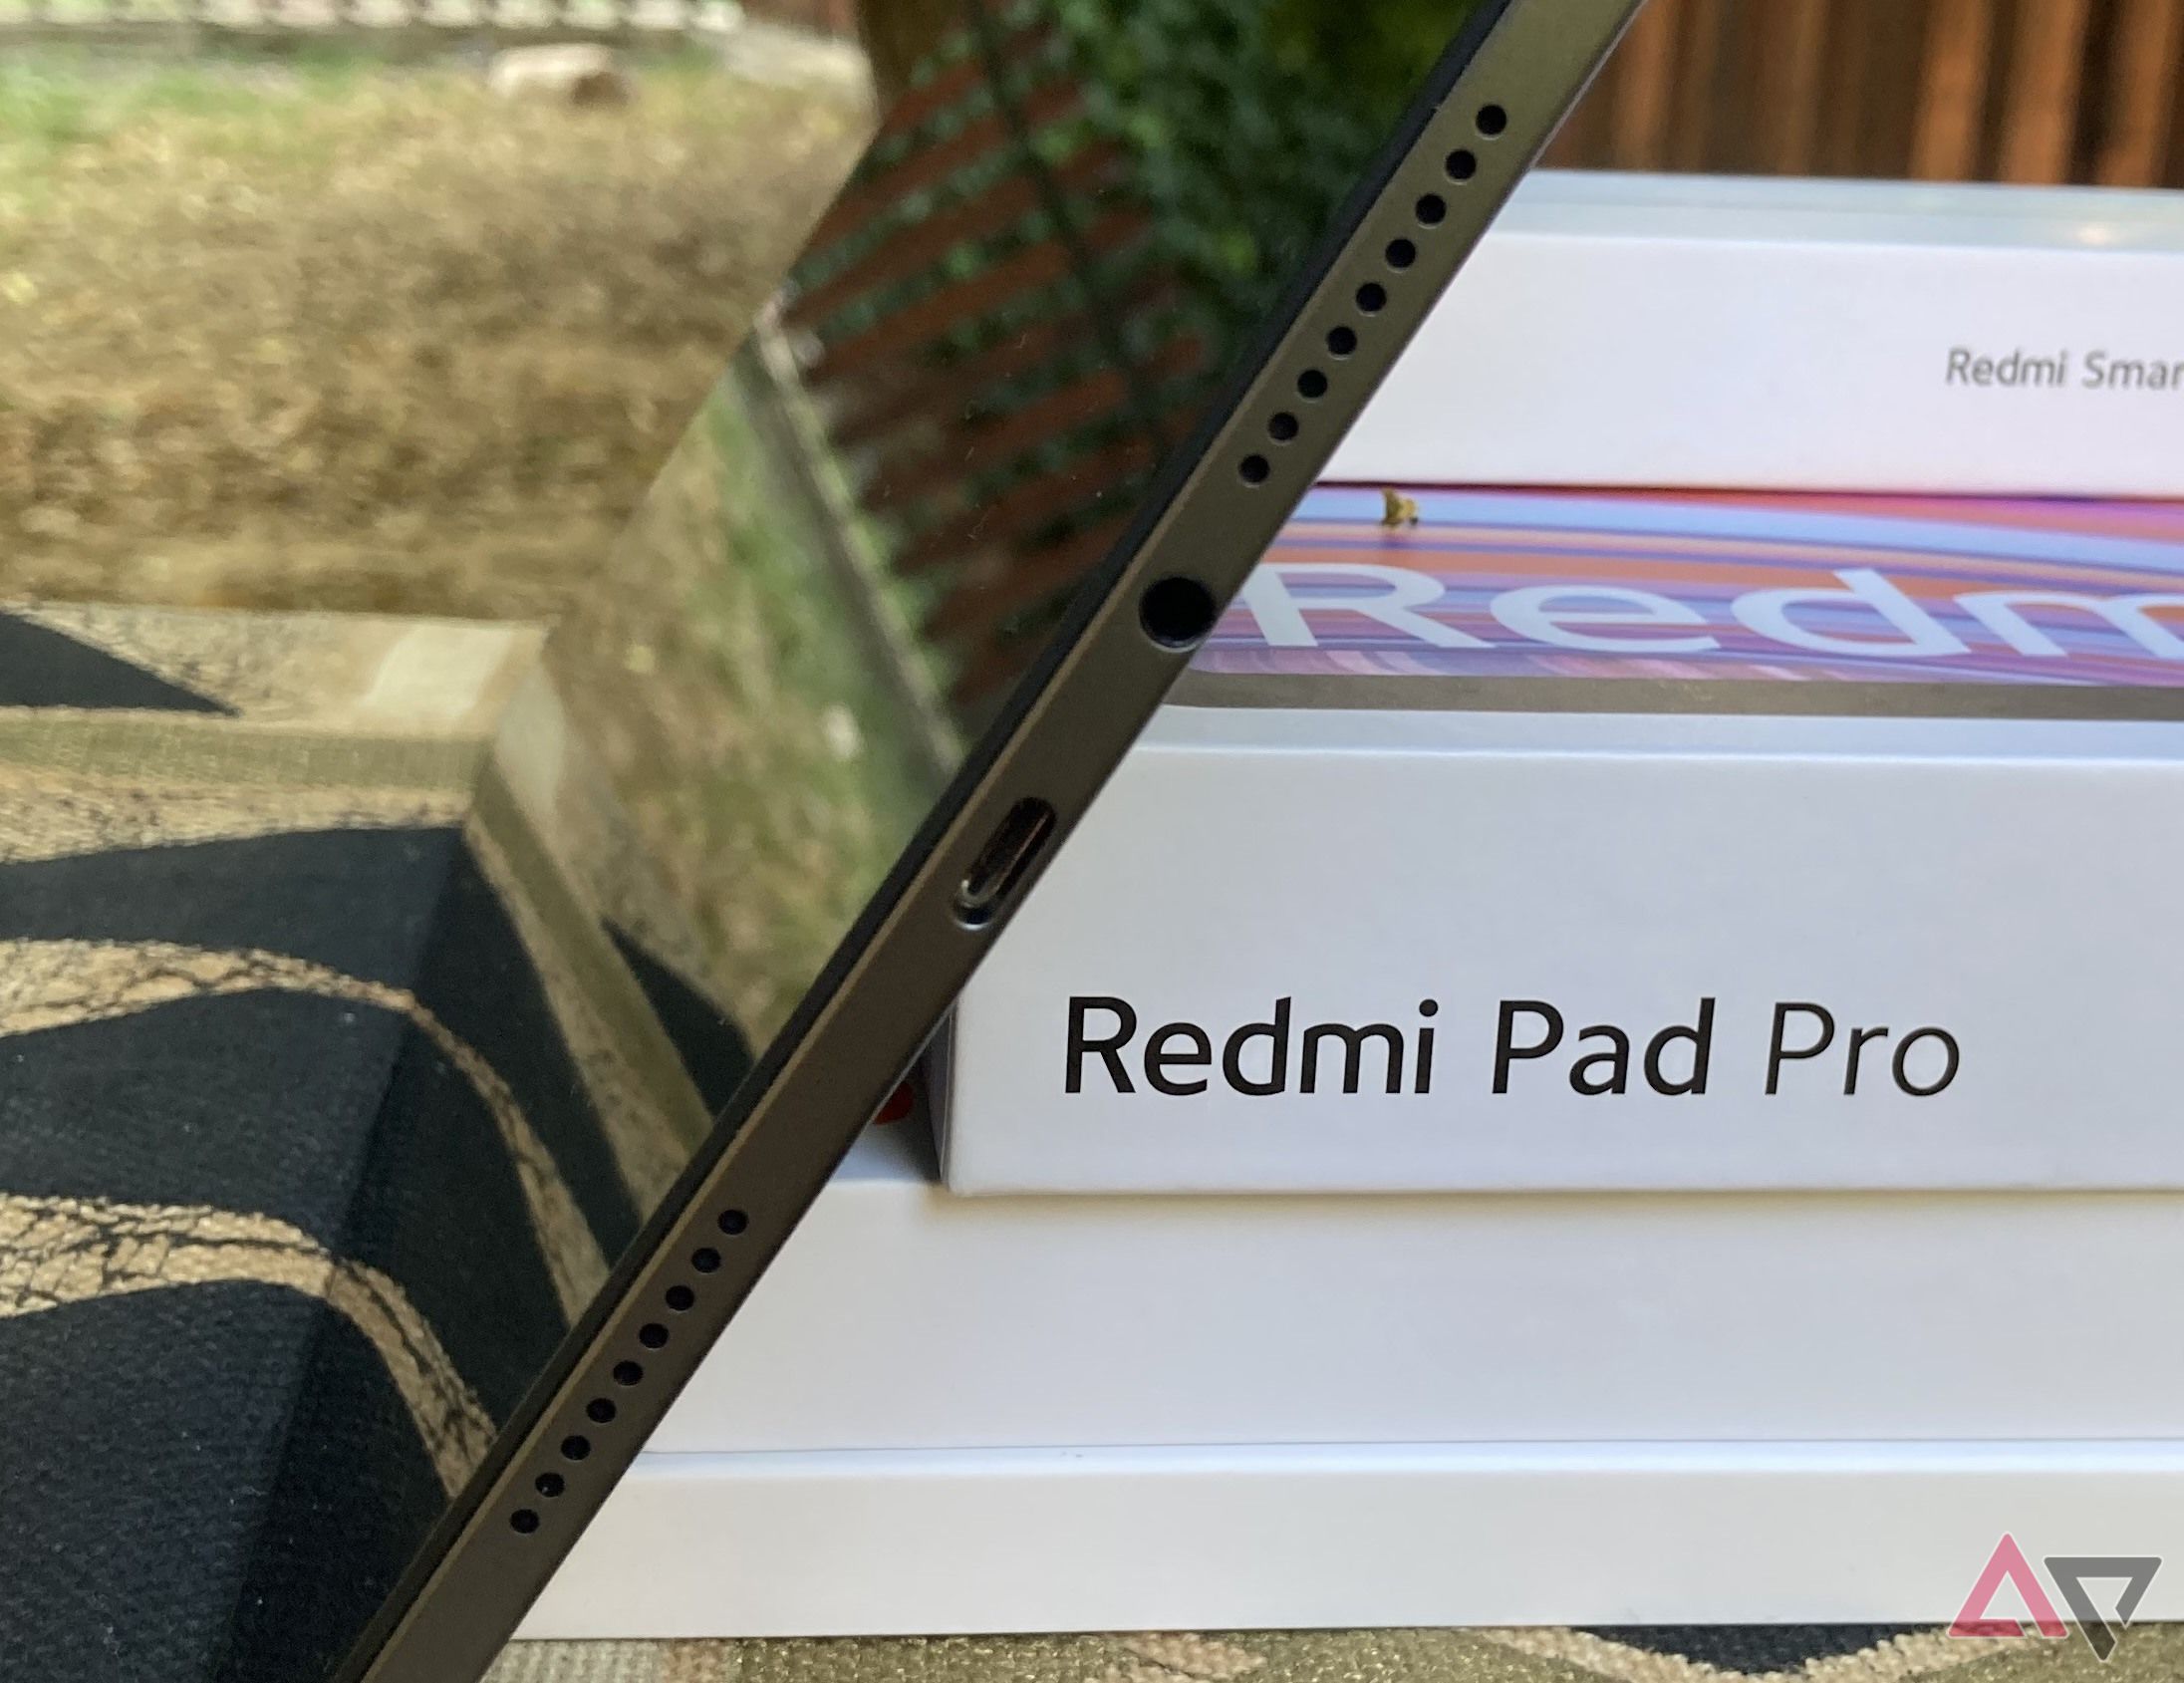 A picture of the Redmi Pad Pro's USB port, headphone jack, and two right-side speakers